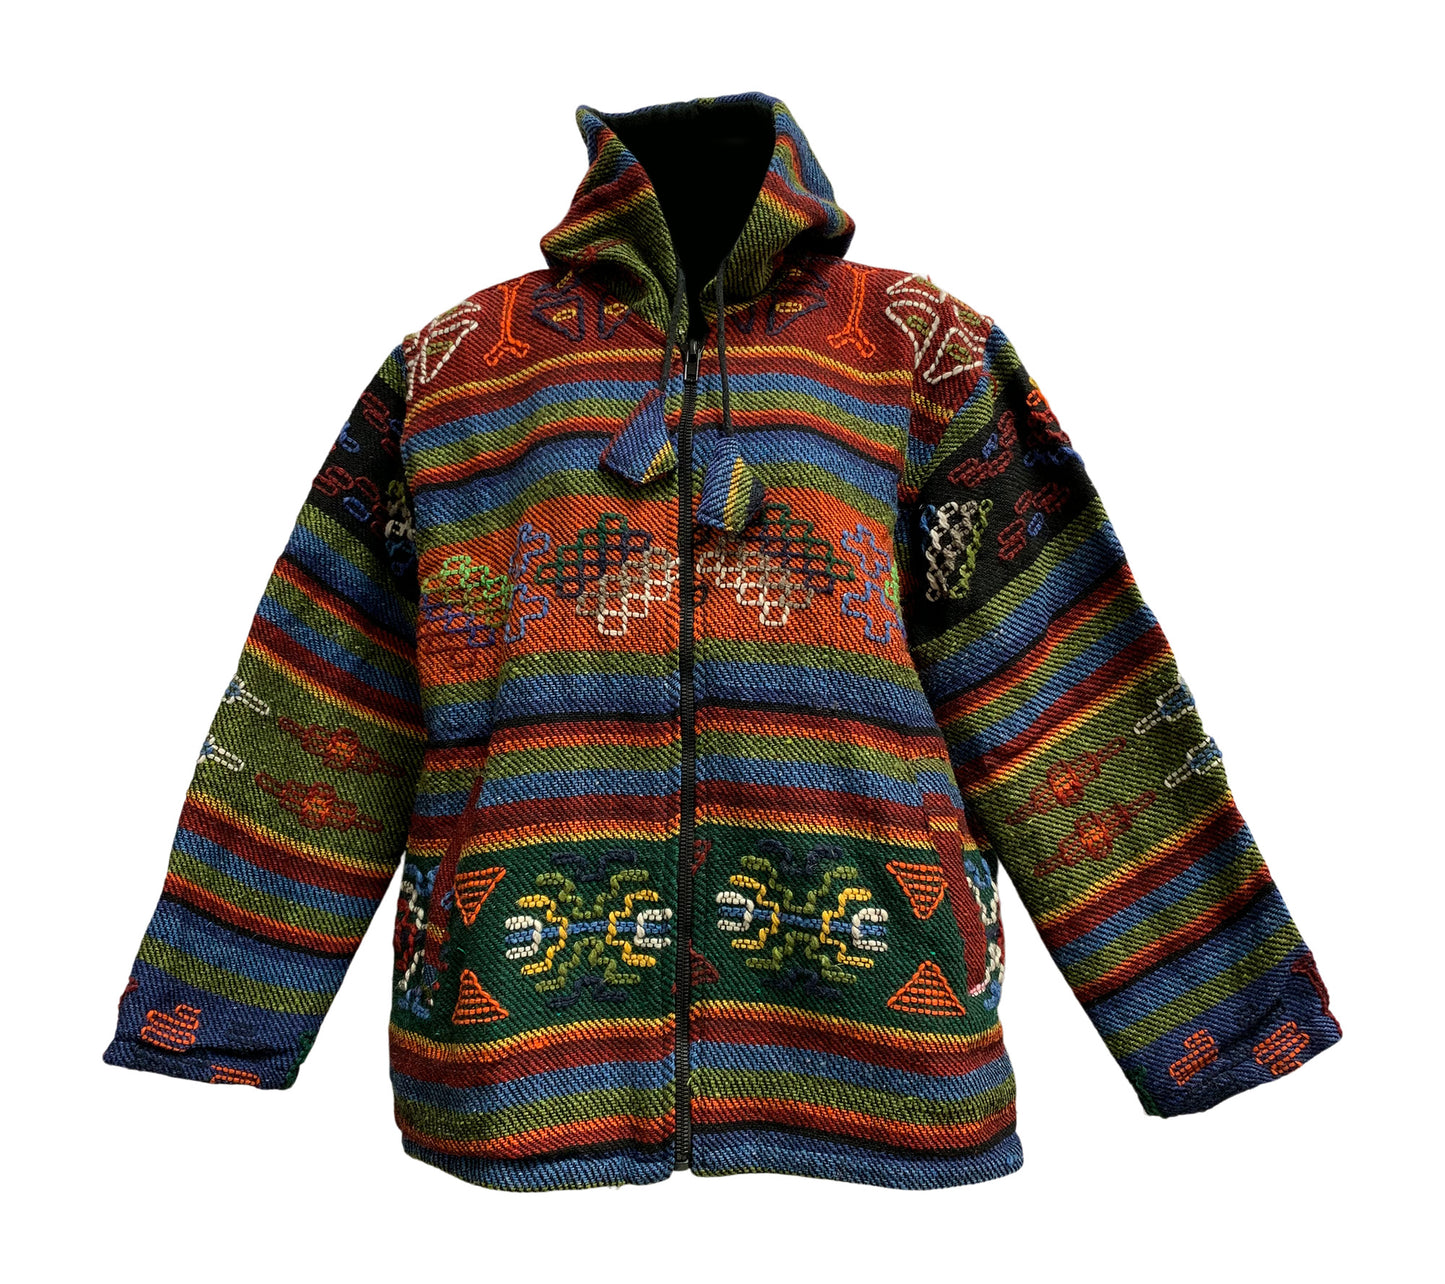 Men's Ethnic Tribal Hand Woven Embroidered Pure Wool Bhutan Jacket - Ambali Fashion Jackets bohemian, boho, casual, classic, ethnic, gypsy, hippie, indian, new age, sixties, traditional, tren